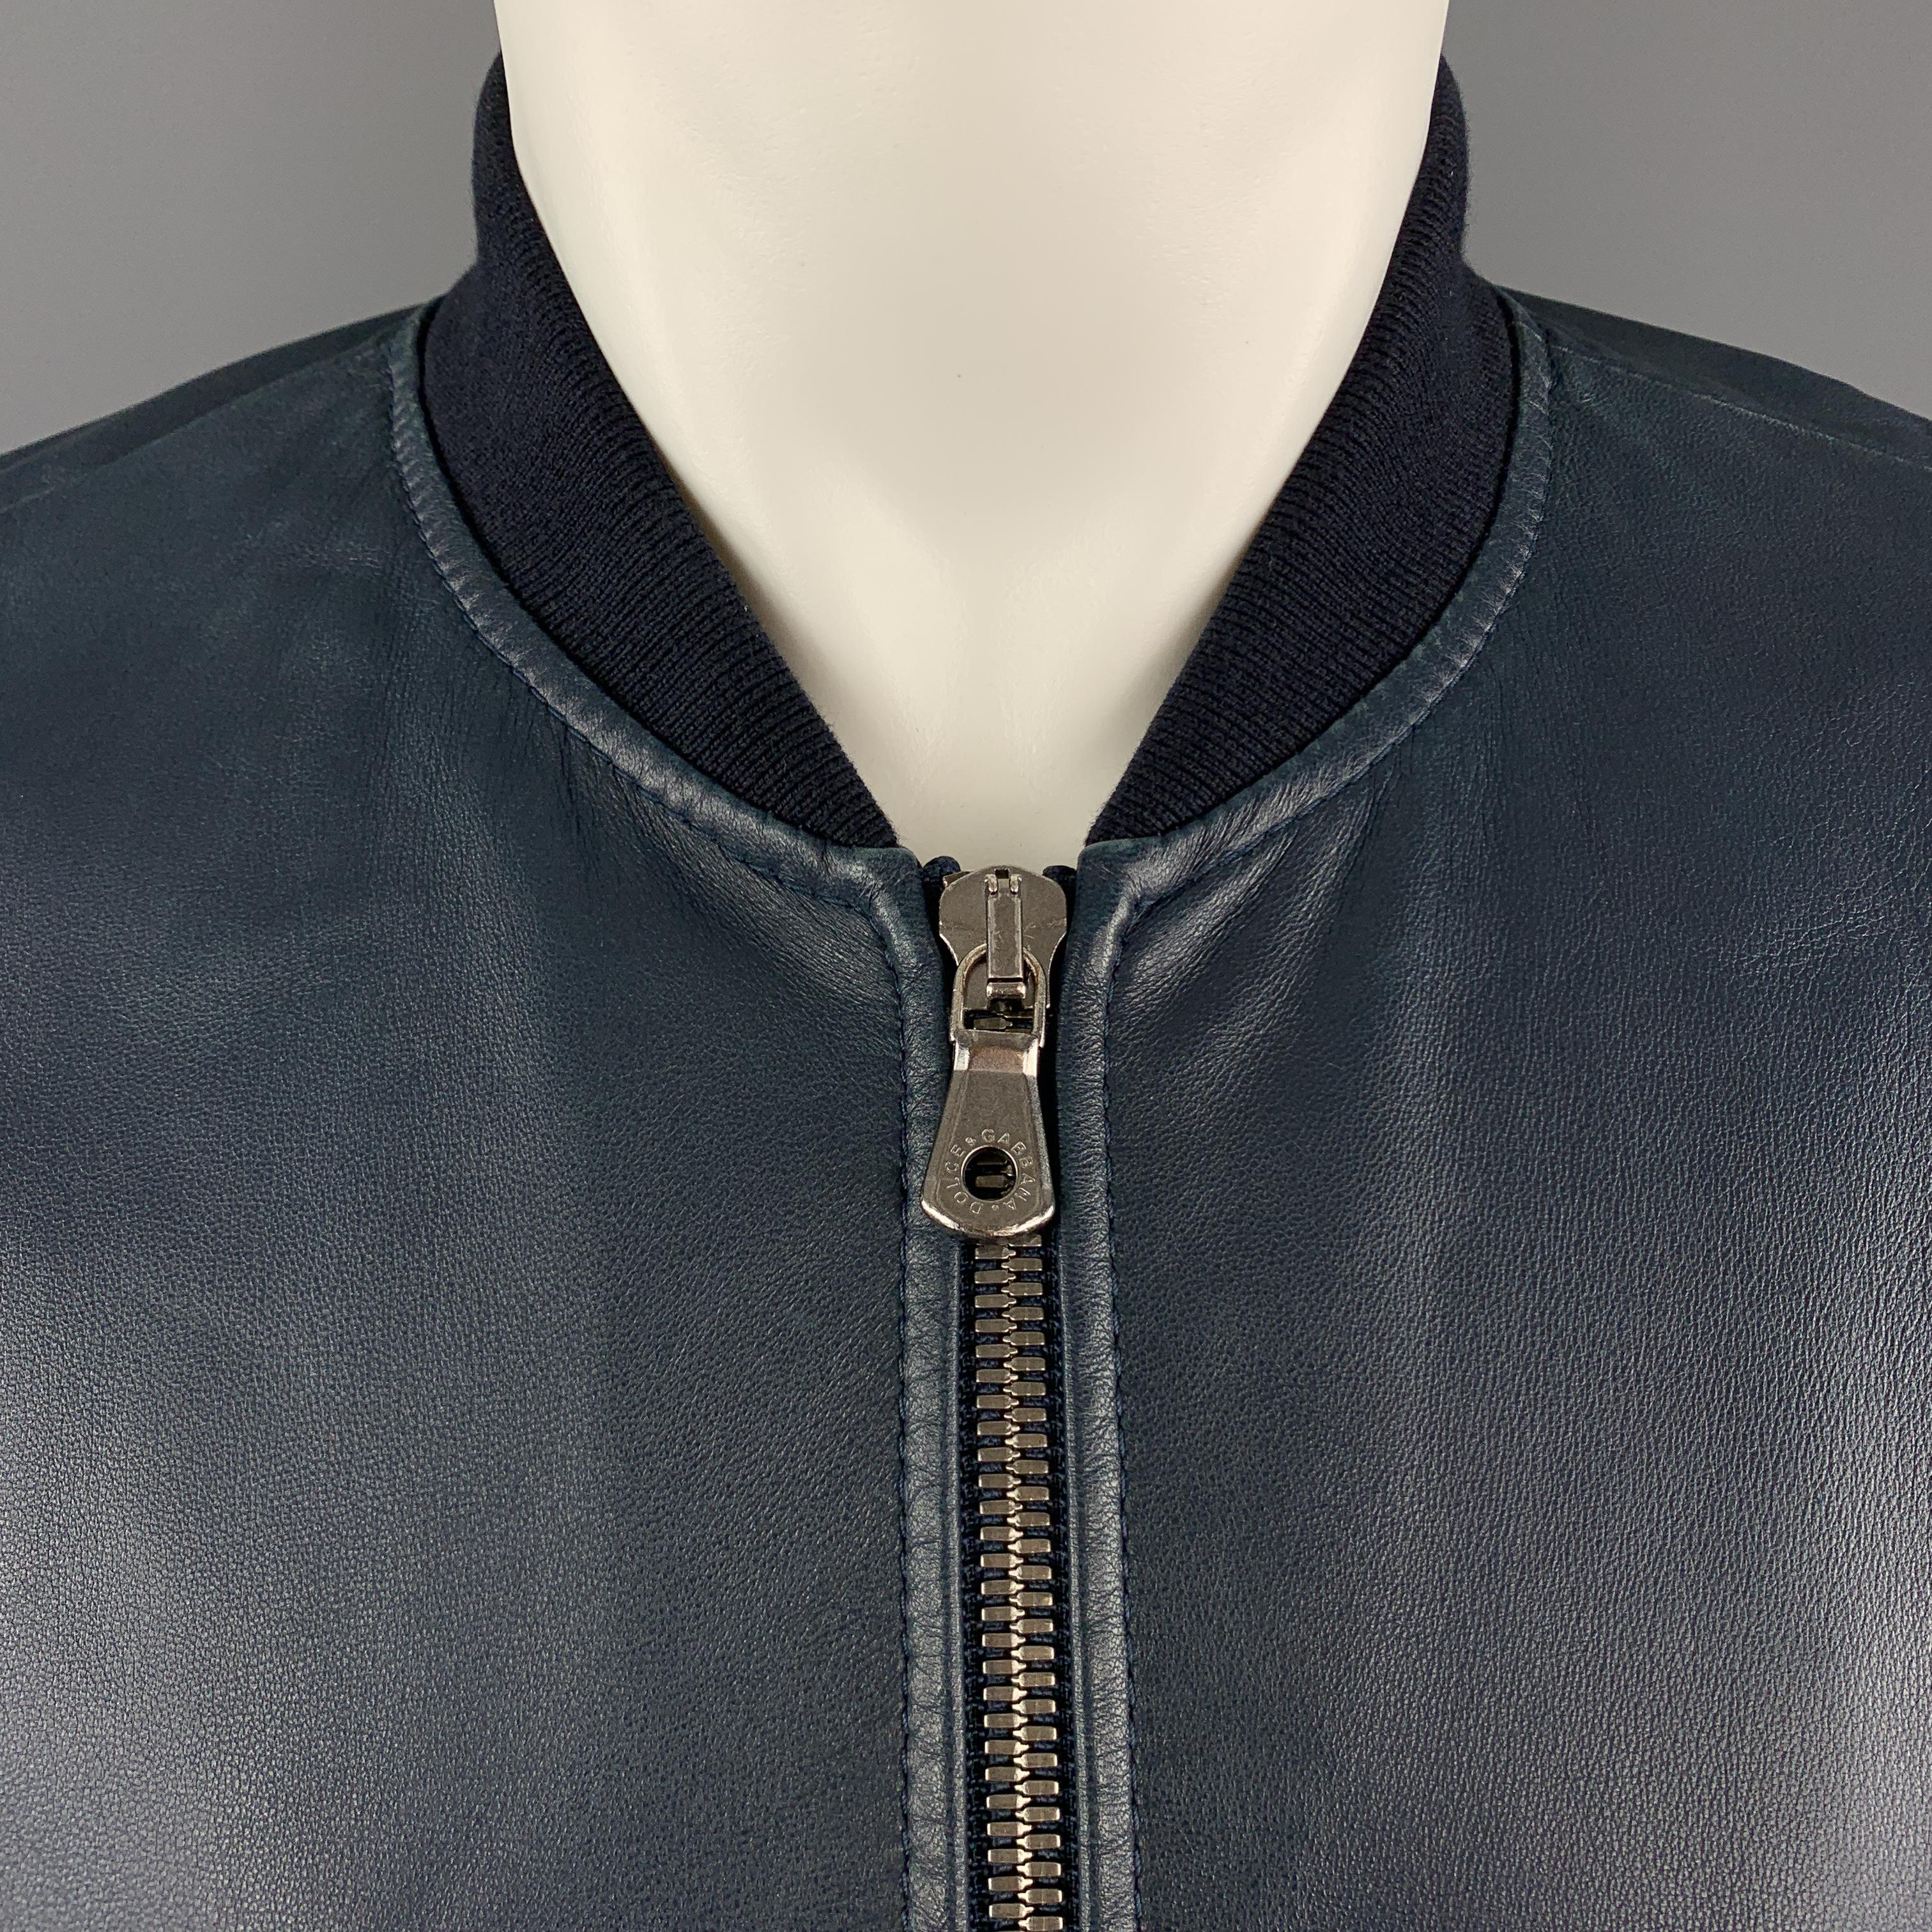 DOLCE & GABBANA slim fit bomber jacket comes in navy leather with a baseball collar, double zip front, and zip pockets. Made in Italy.

New with Tags.
Marked: IT 46

Measurements:

Shoulder: 16 in.
Chest: 38 in.
Sleeve: 26 in.
Length: 25 in.